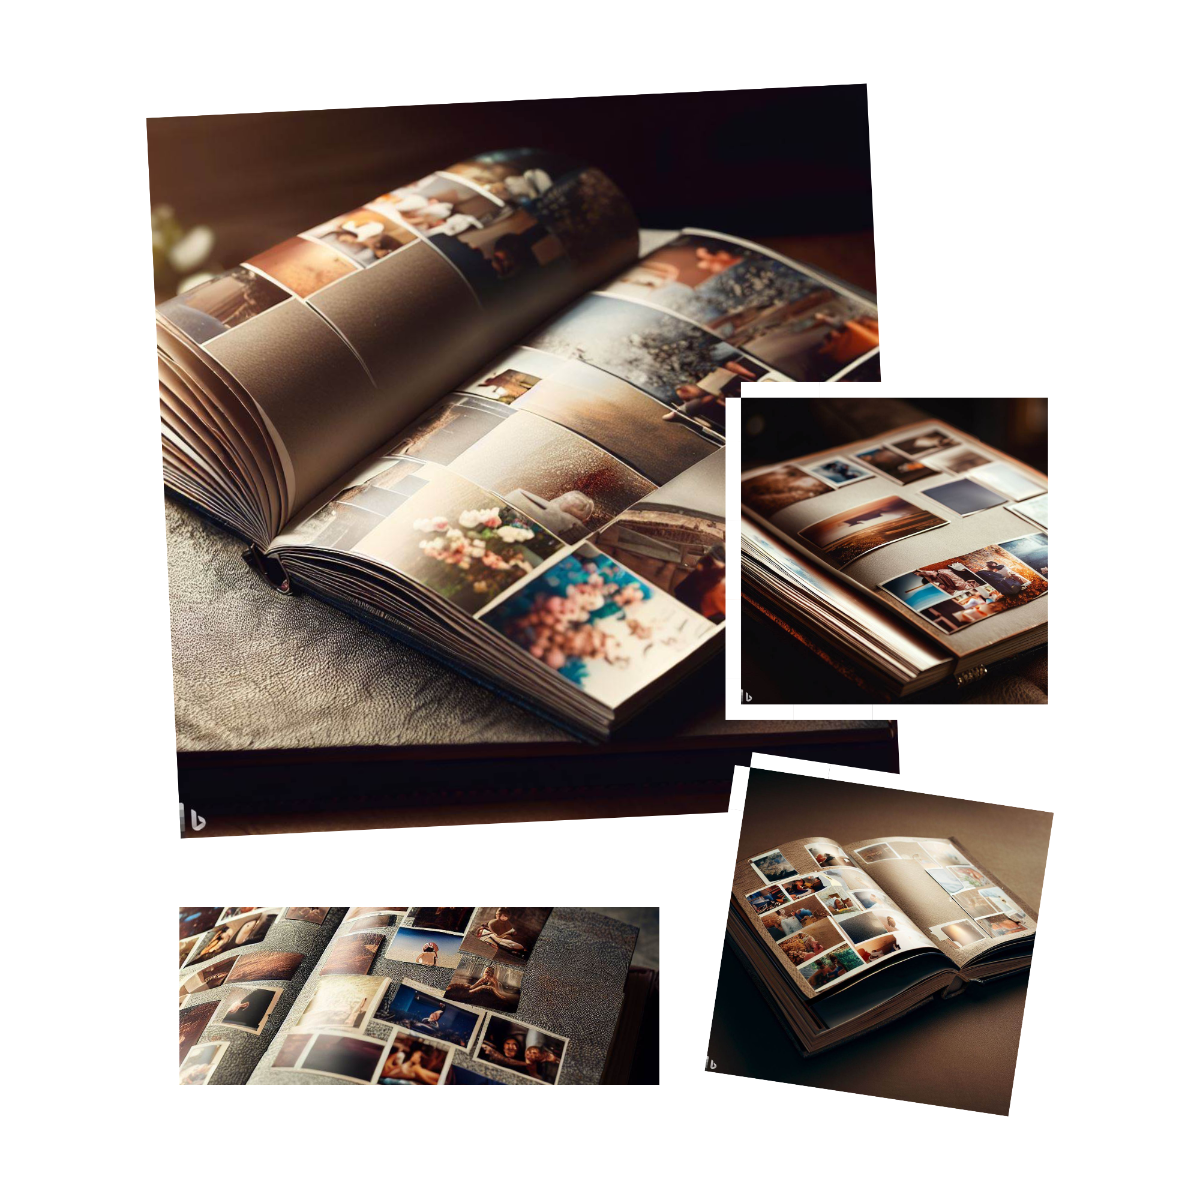 A custom-made photo album showcasing treasured memories and heartfelt moments captured on its beautifully designed pages.